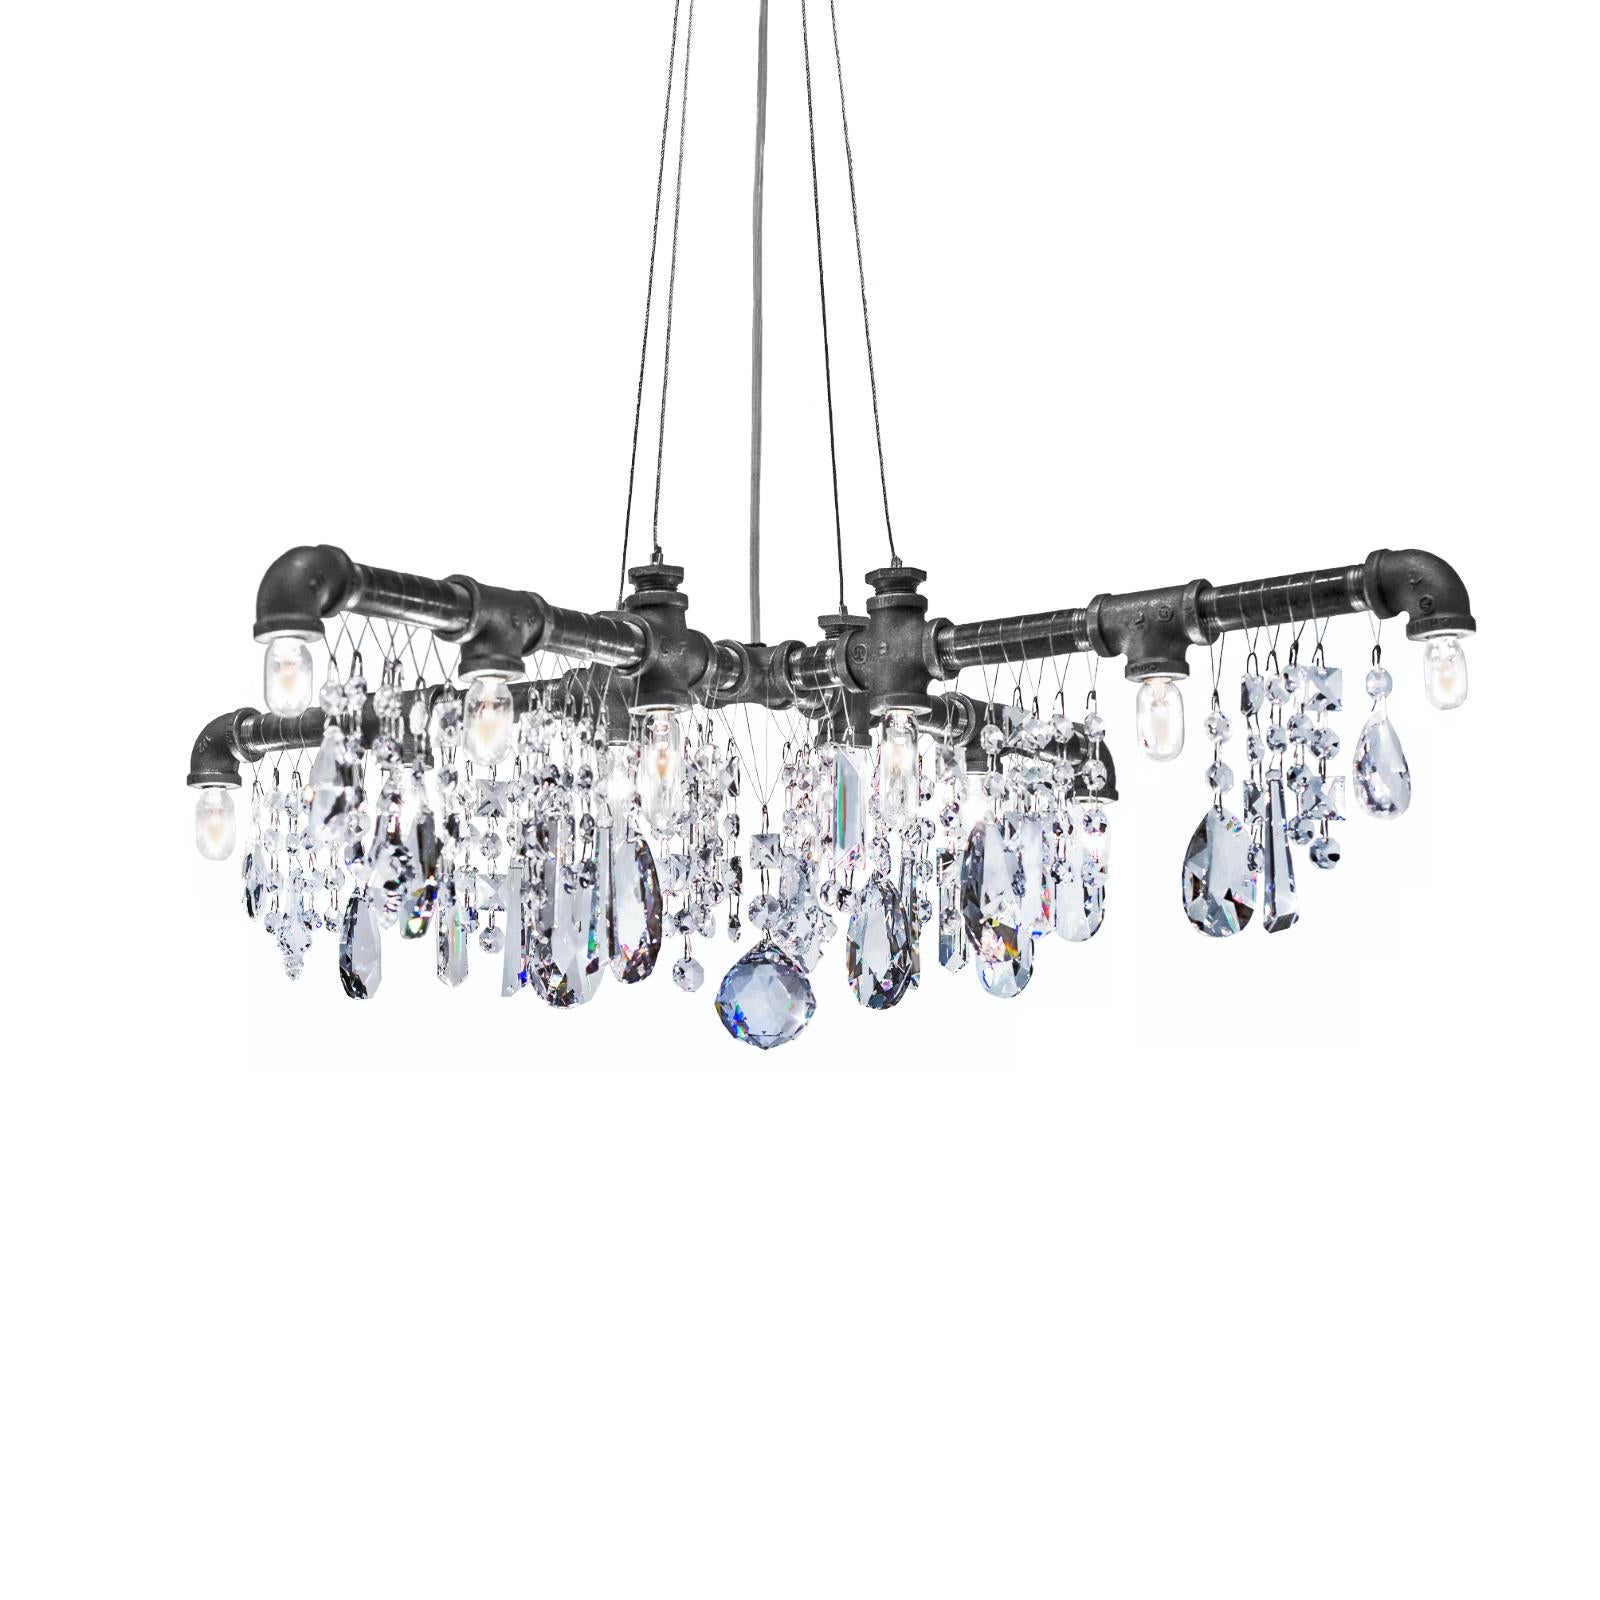 Tribeca X chandelier by Michael McHale
Dimensions: D 56 x W 56 x H 20
Materials: steel, optically-pure gem-cut crystal.

12 x candelabra base T5 bulb, either incandescent or LED

All our lamps can be wired according to each country. If sold to